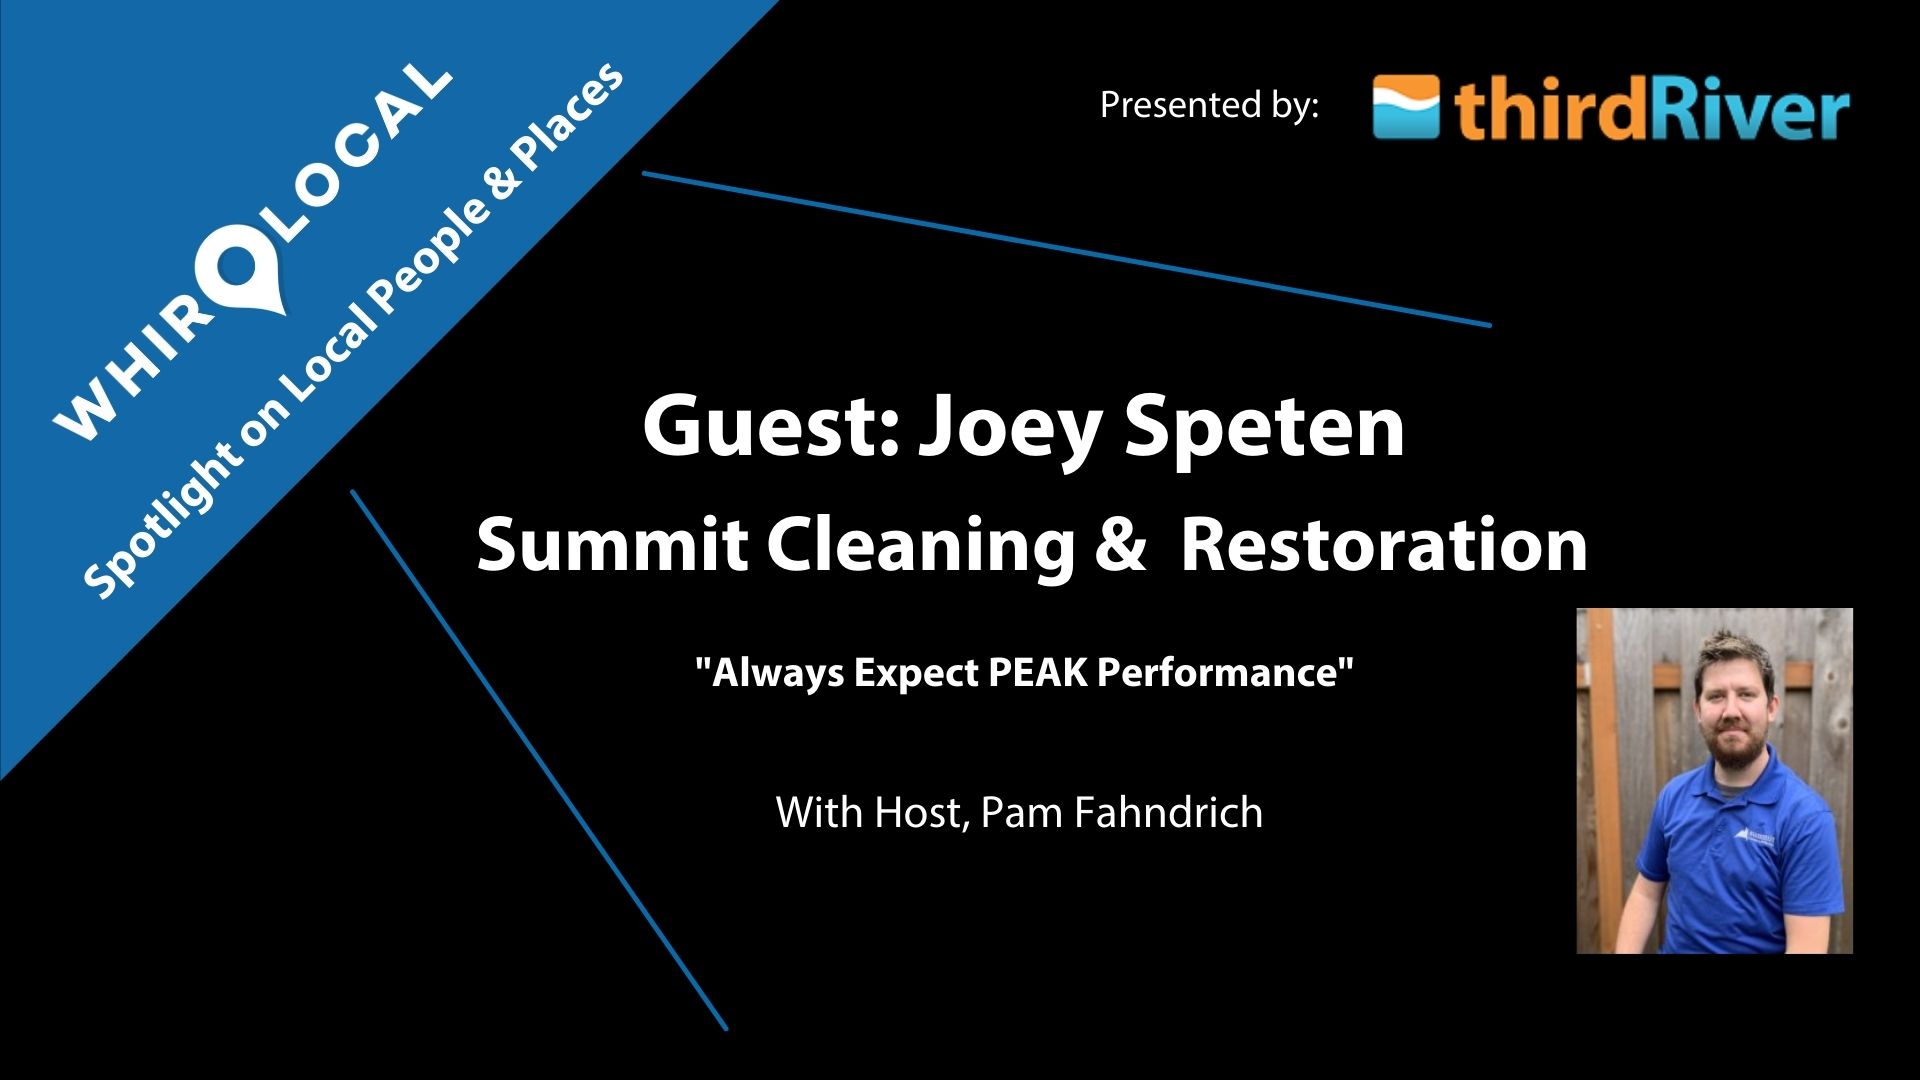 Joey Speten with Summit Cleaning & Restoration on helping the local community over the past 12 months